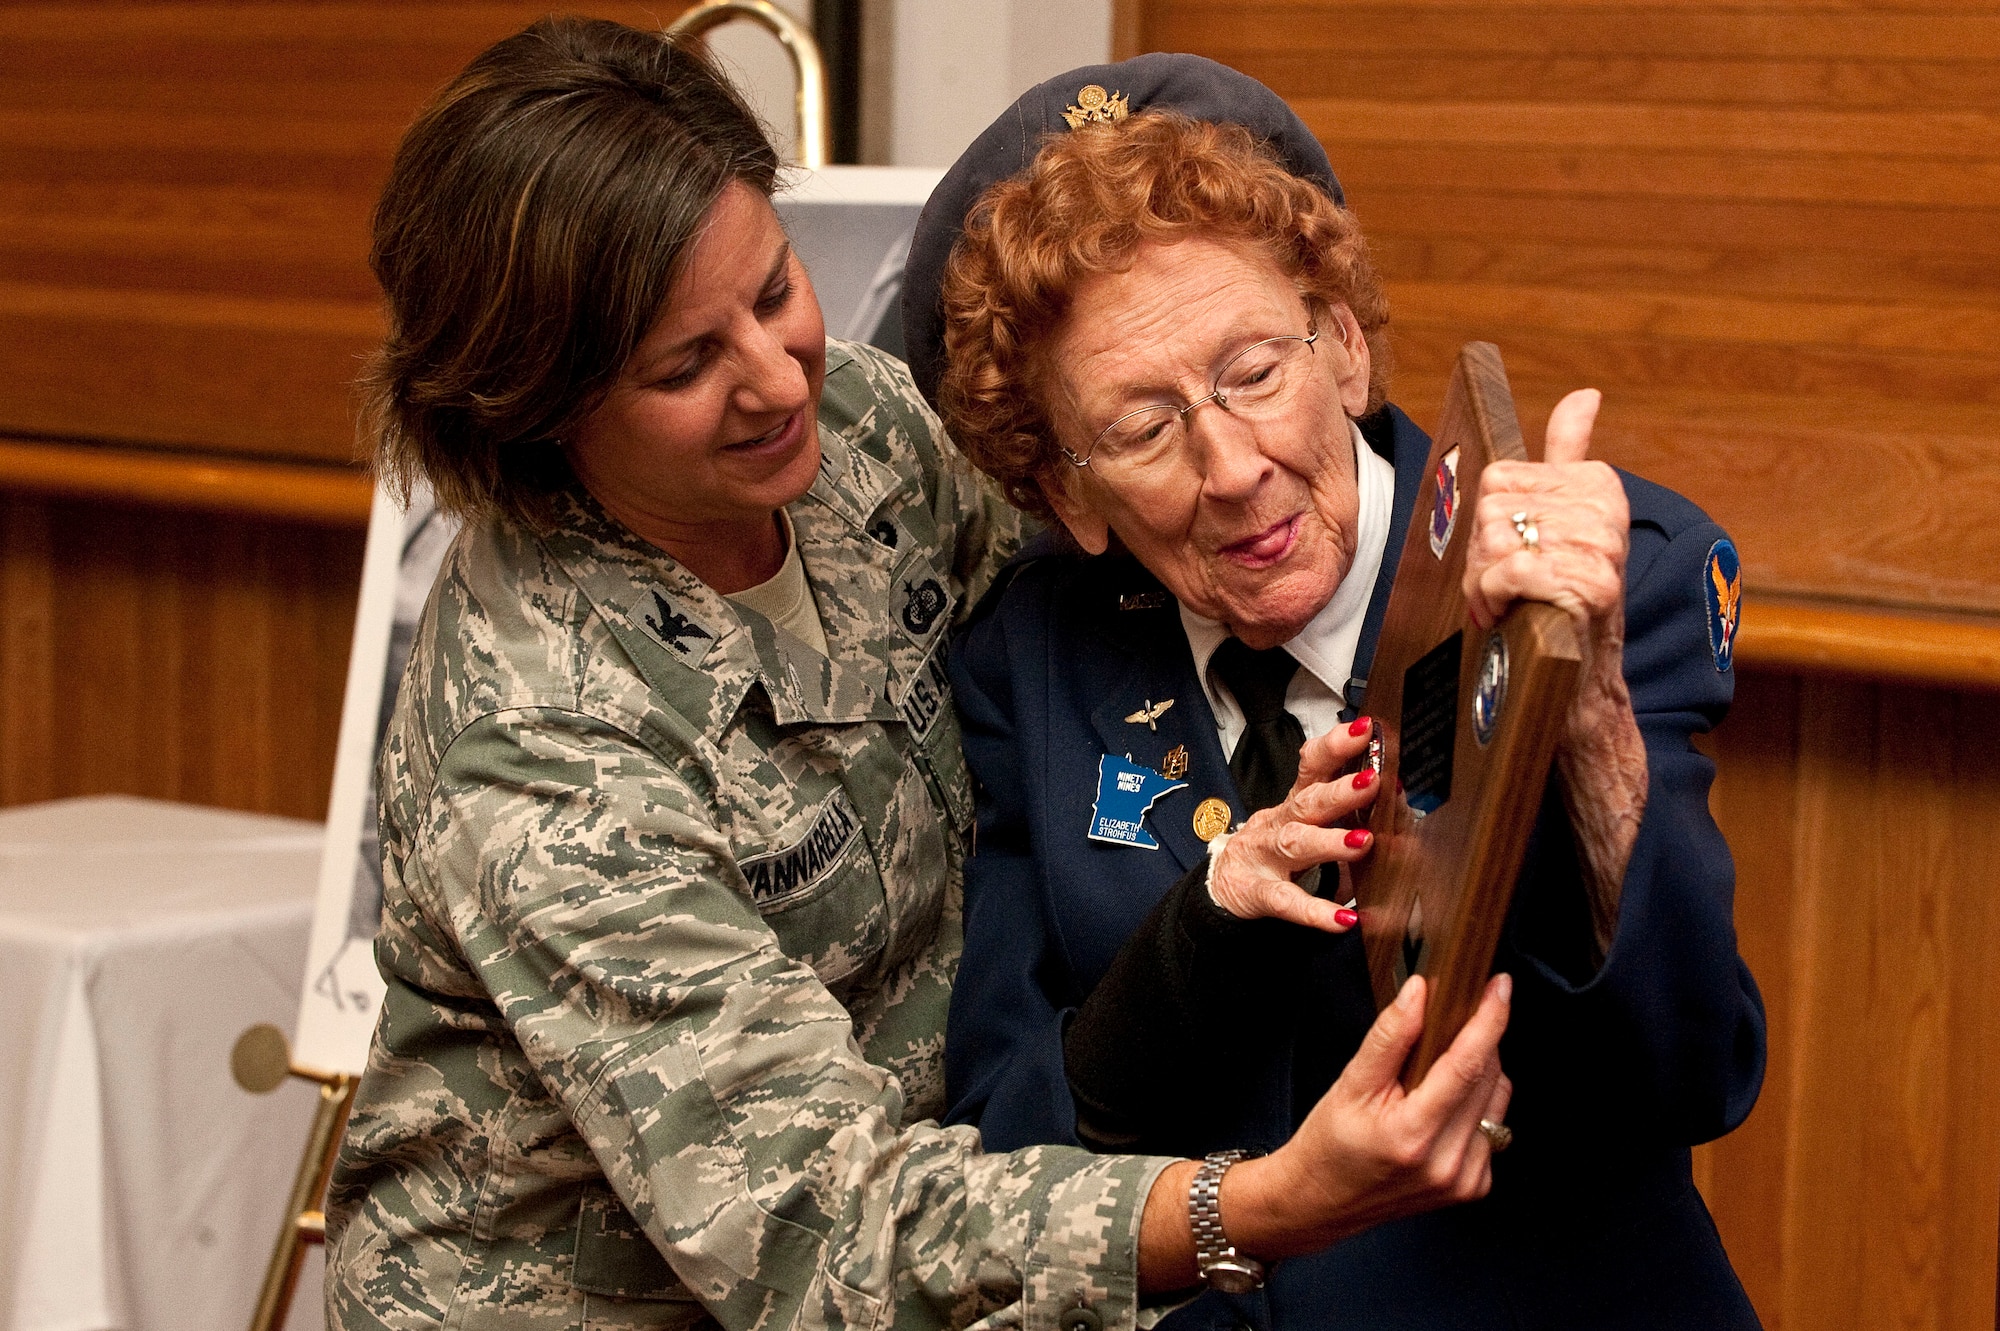 Col. Carol Yannarella, 99th Air Base Wing vice commander, presents the Diamondback Award to Betty Wall Strohfus, a WWII Women Airforce Service Pilot, during a distinguished visit Sept. 27, 2012, at Nellis Air Force Base, Nev. The Diamondback Award is awarded to Airmen who help keep the spirit of innovation alive. (U.S. Air Force photo by Staff Sgt. Christopher Hubenthal)